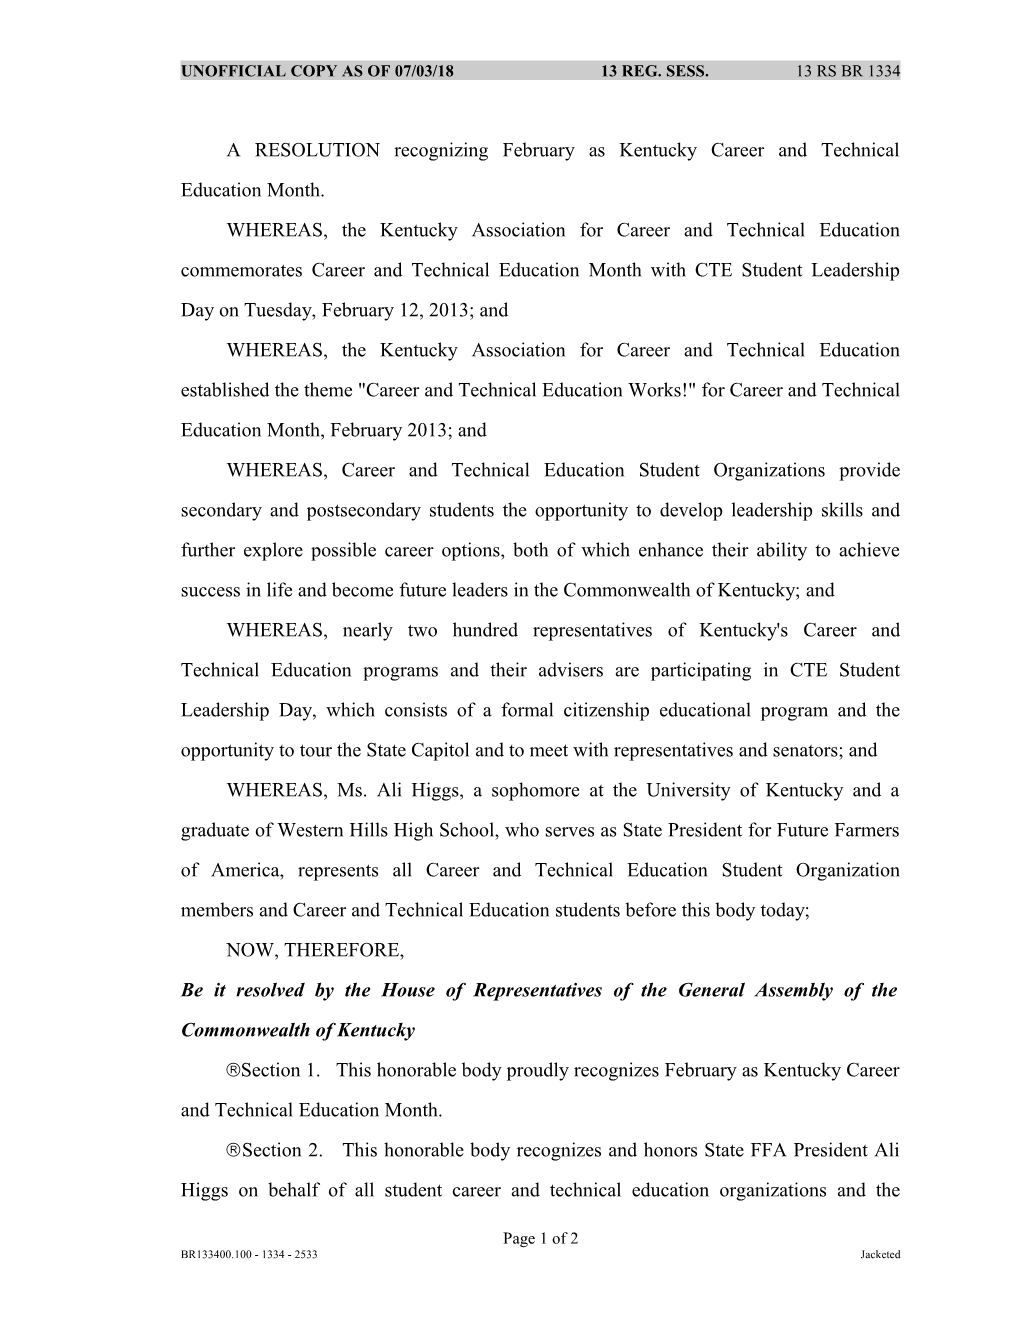 A RESOLUTION Recognizing February As Kentucky Career and Technical Education Month